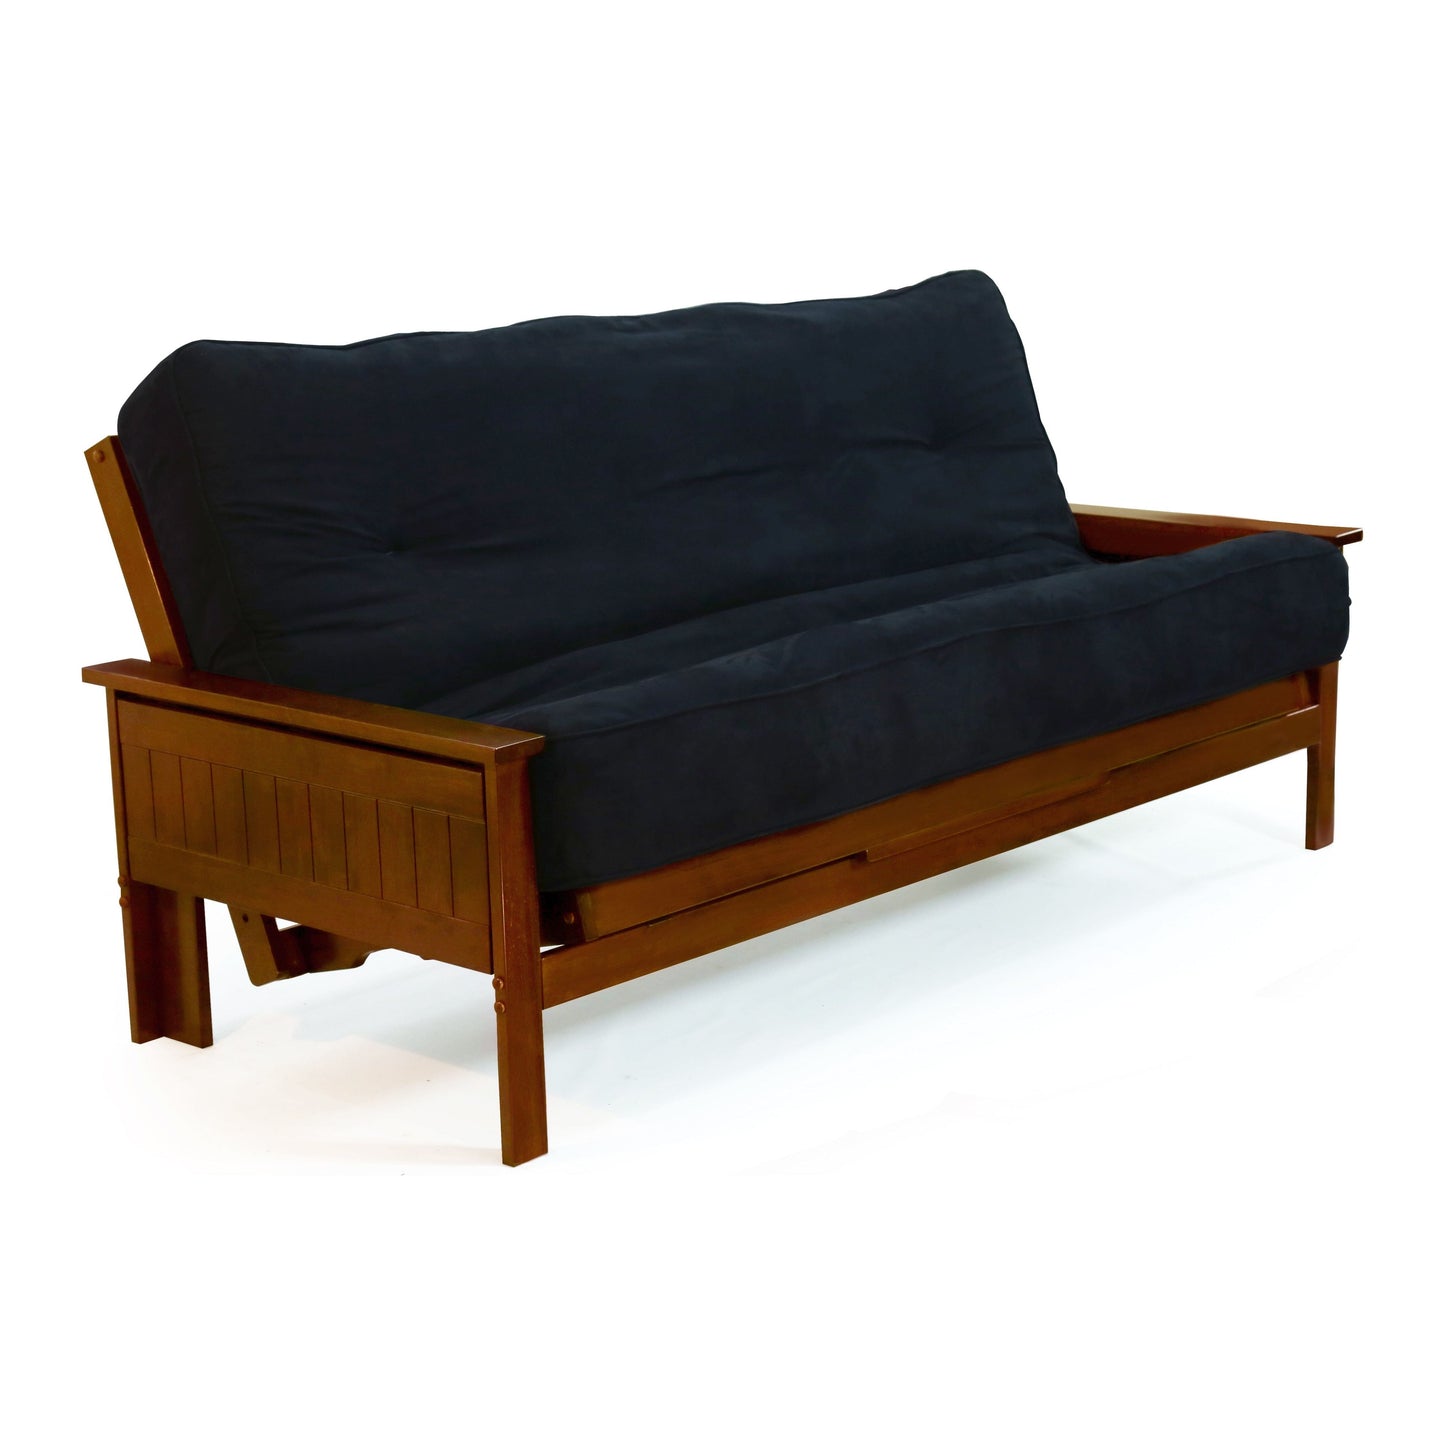 Night and Day Seattle Queen Futon Frame in black walnut finish